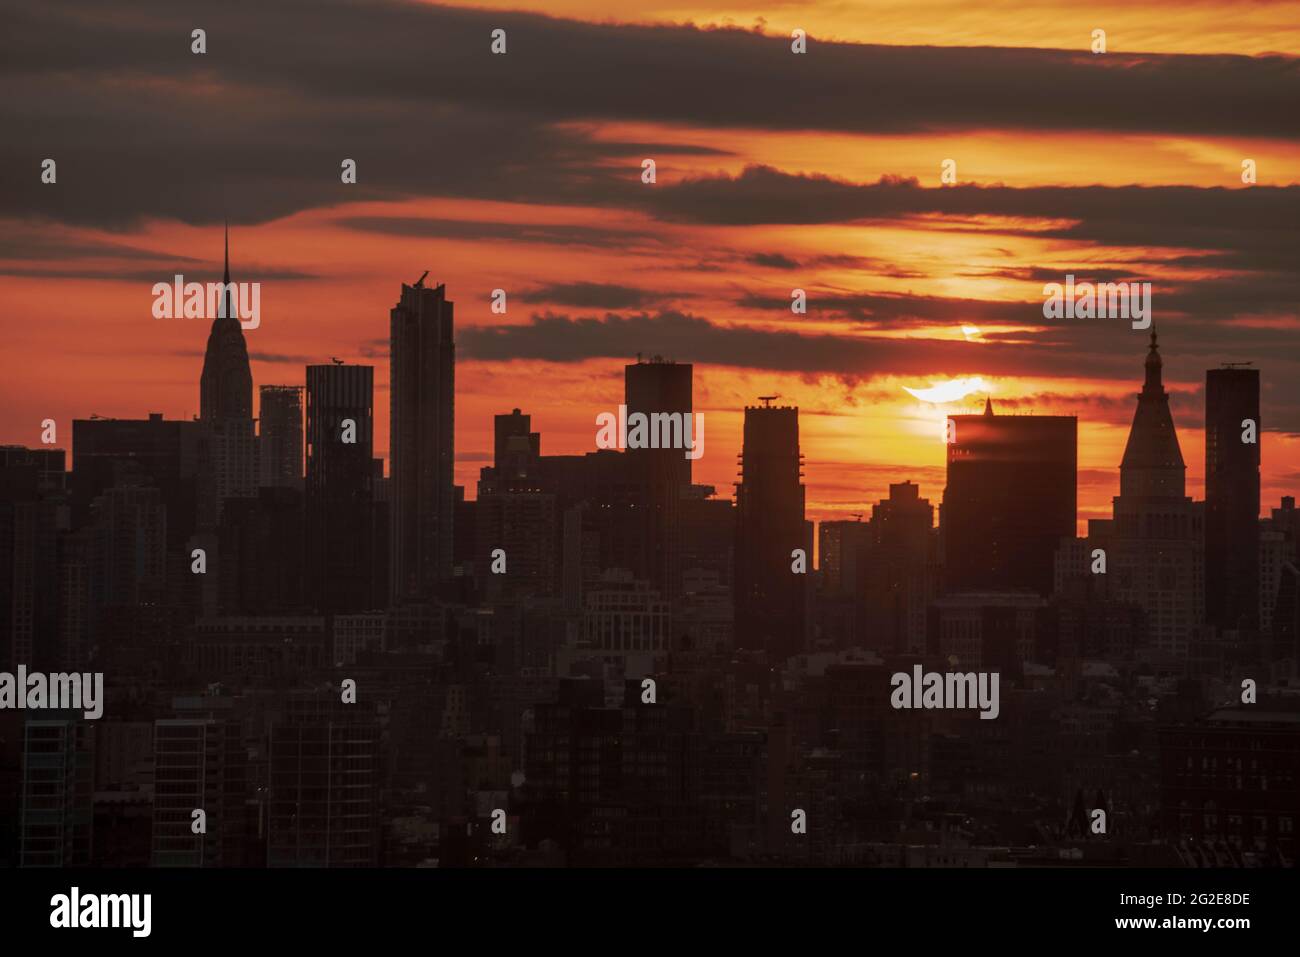 June 10, 2021 partial solar eclipse over NYC skyline at sunrise Stock Photo